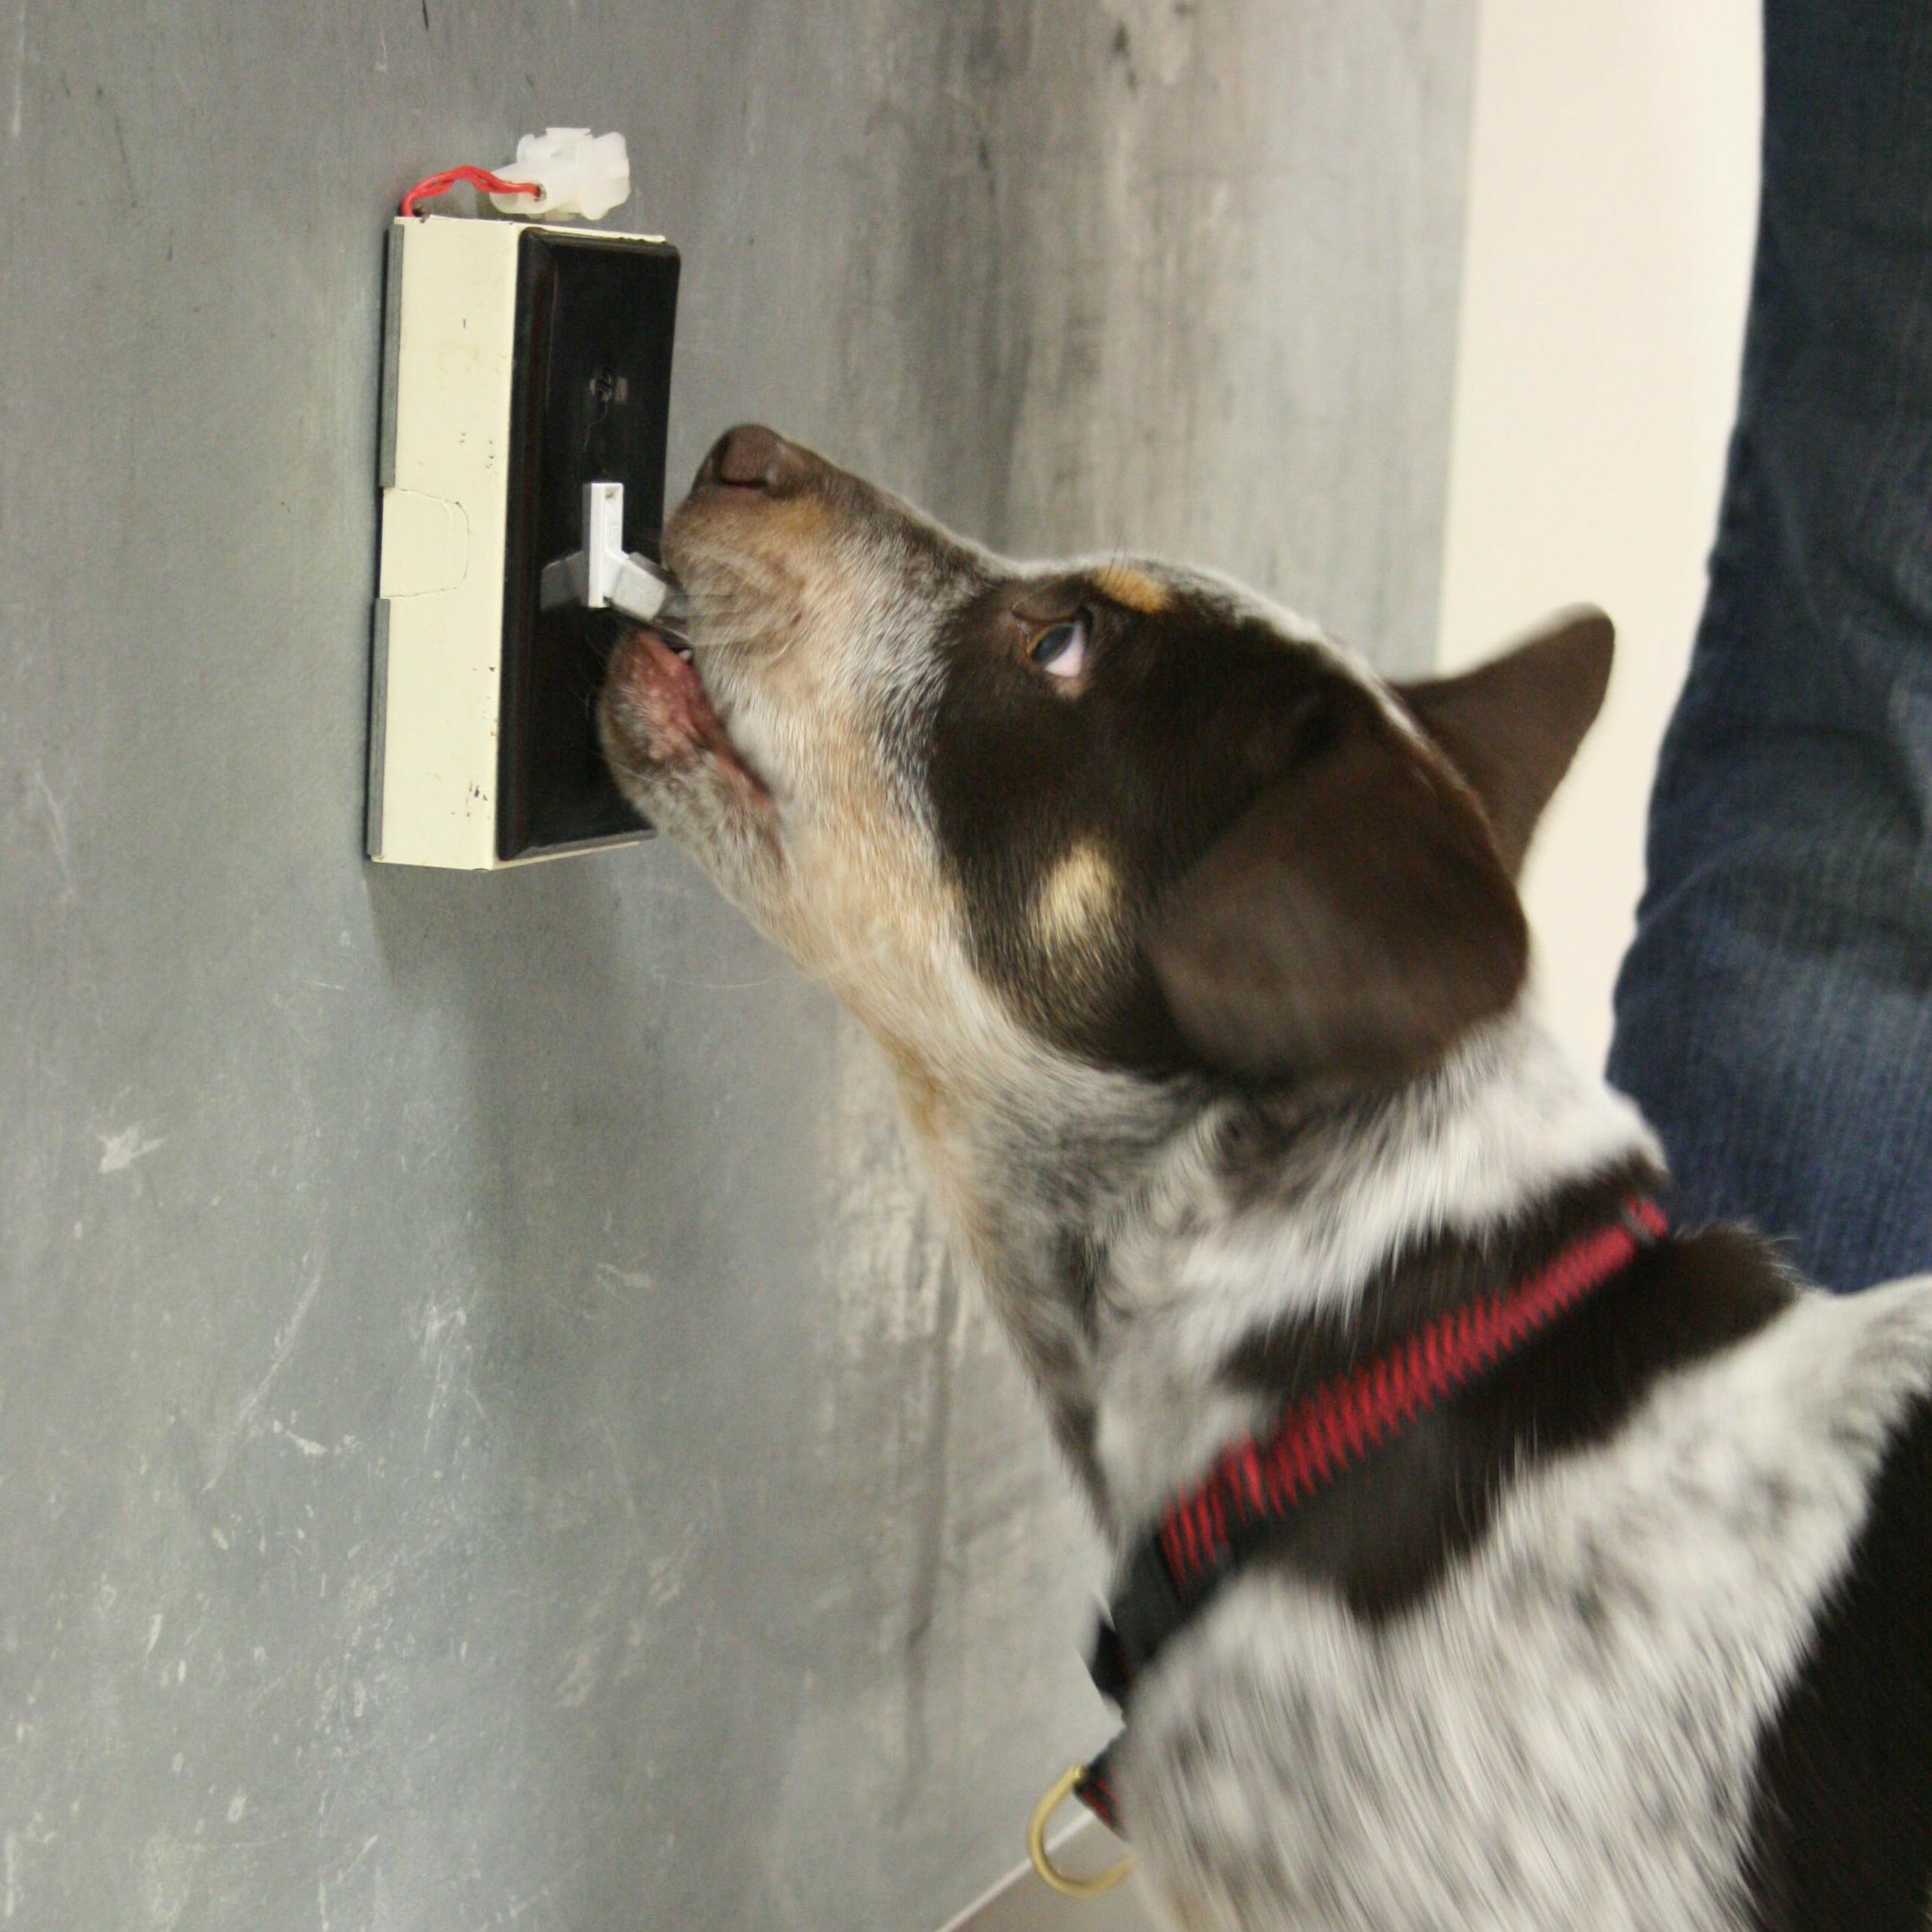 Australian Shepherd mix activating a light switch with its mouth